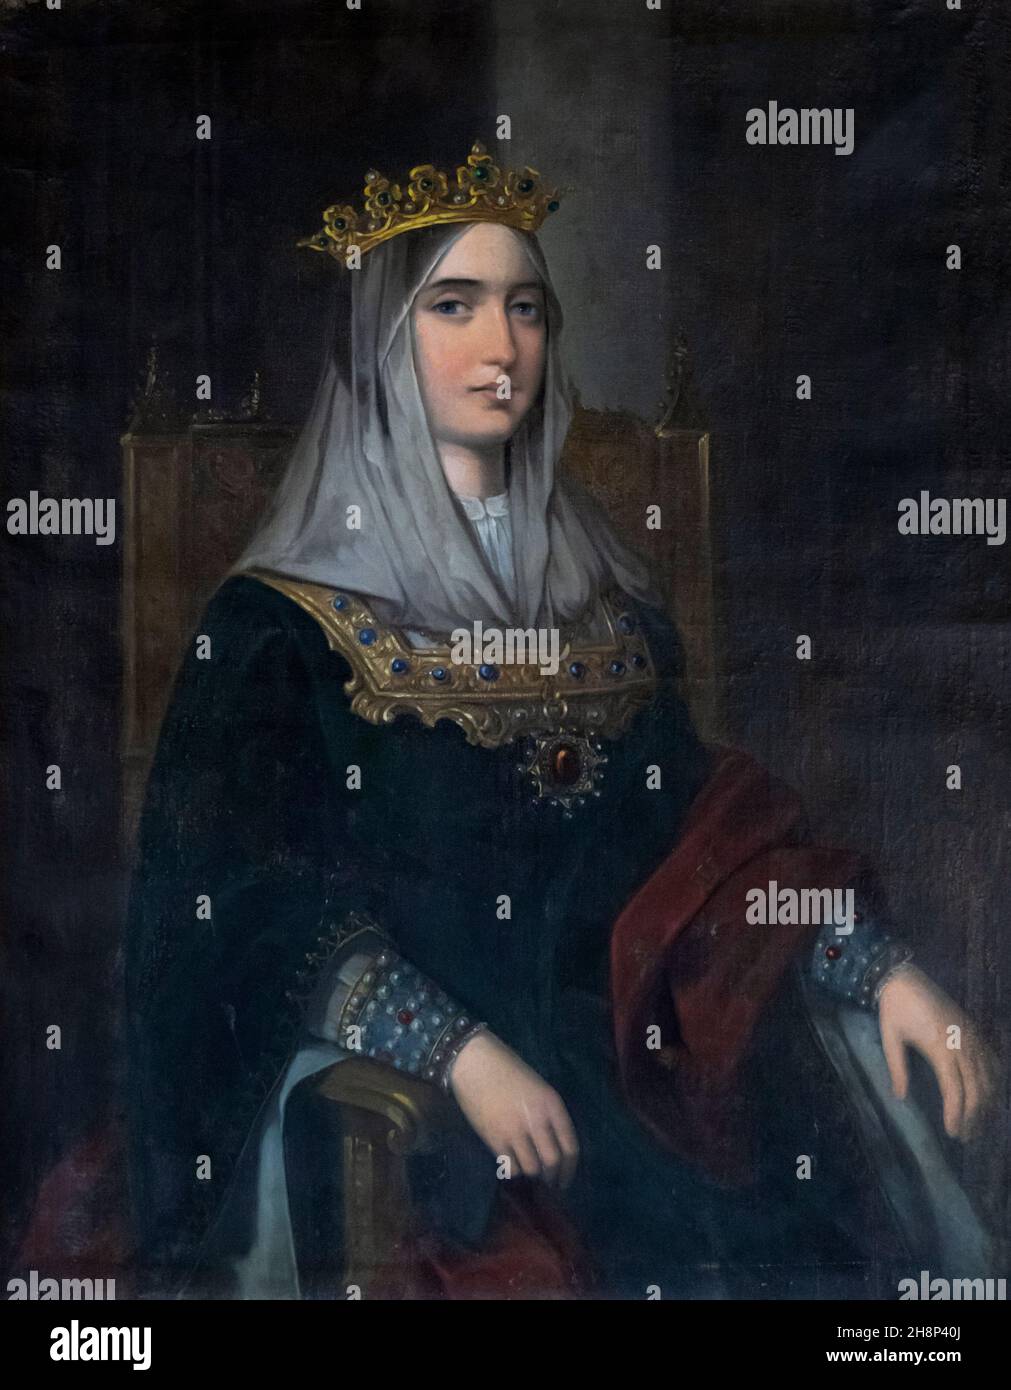 Isabella the Catholic, Isabel la Católica 1451 - 1504. Queen of Castile and of Aragon.  Romanticized painting by 19th century artist Jose Rosa.  La Ra Stock Photo